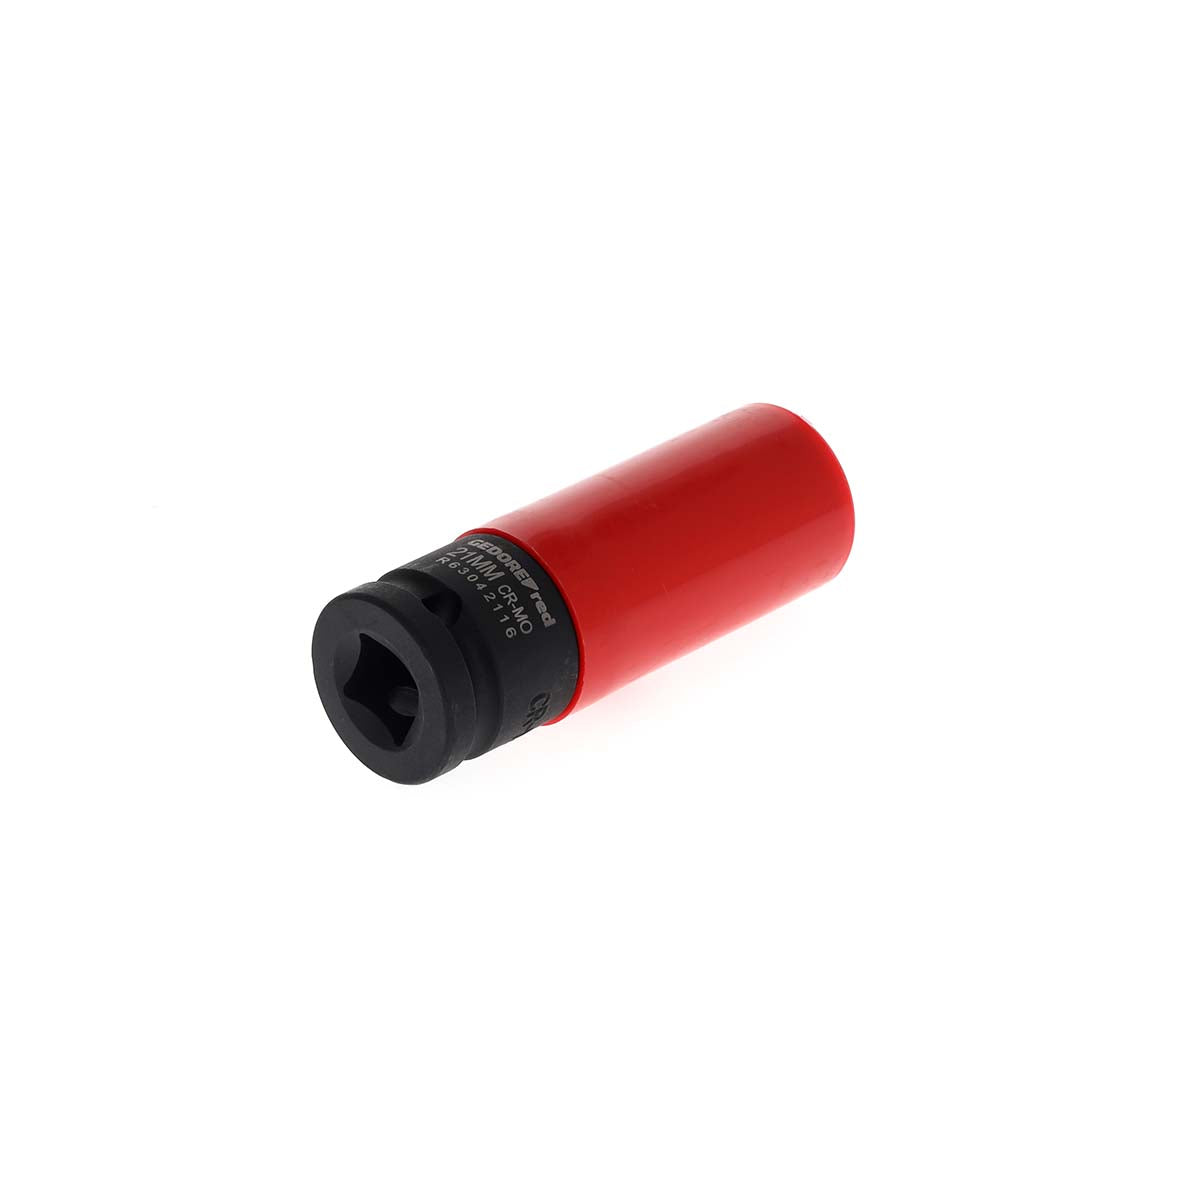 GEDORE red R63042116 - Impact socket 1/2" 21 mm protective sleeve (3300587)